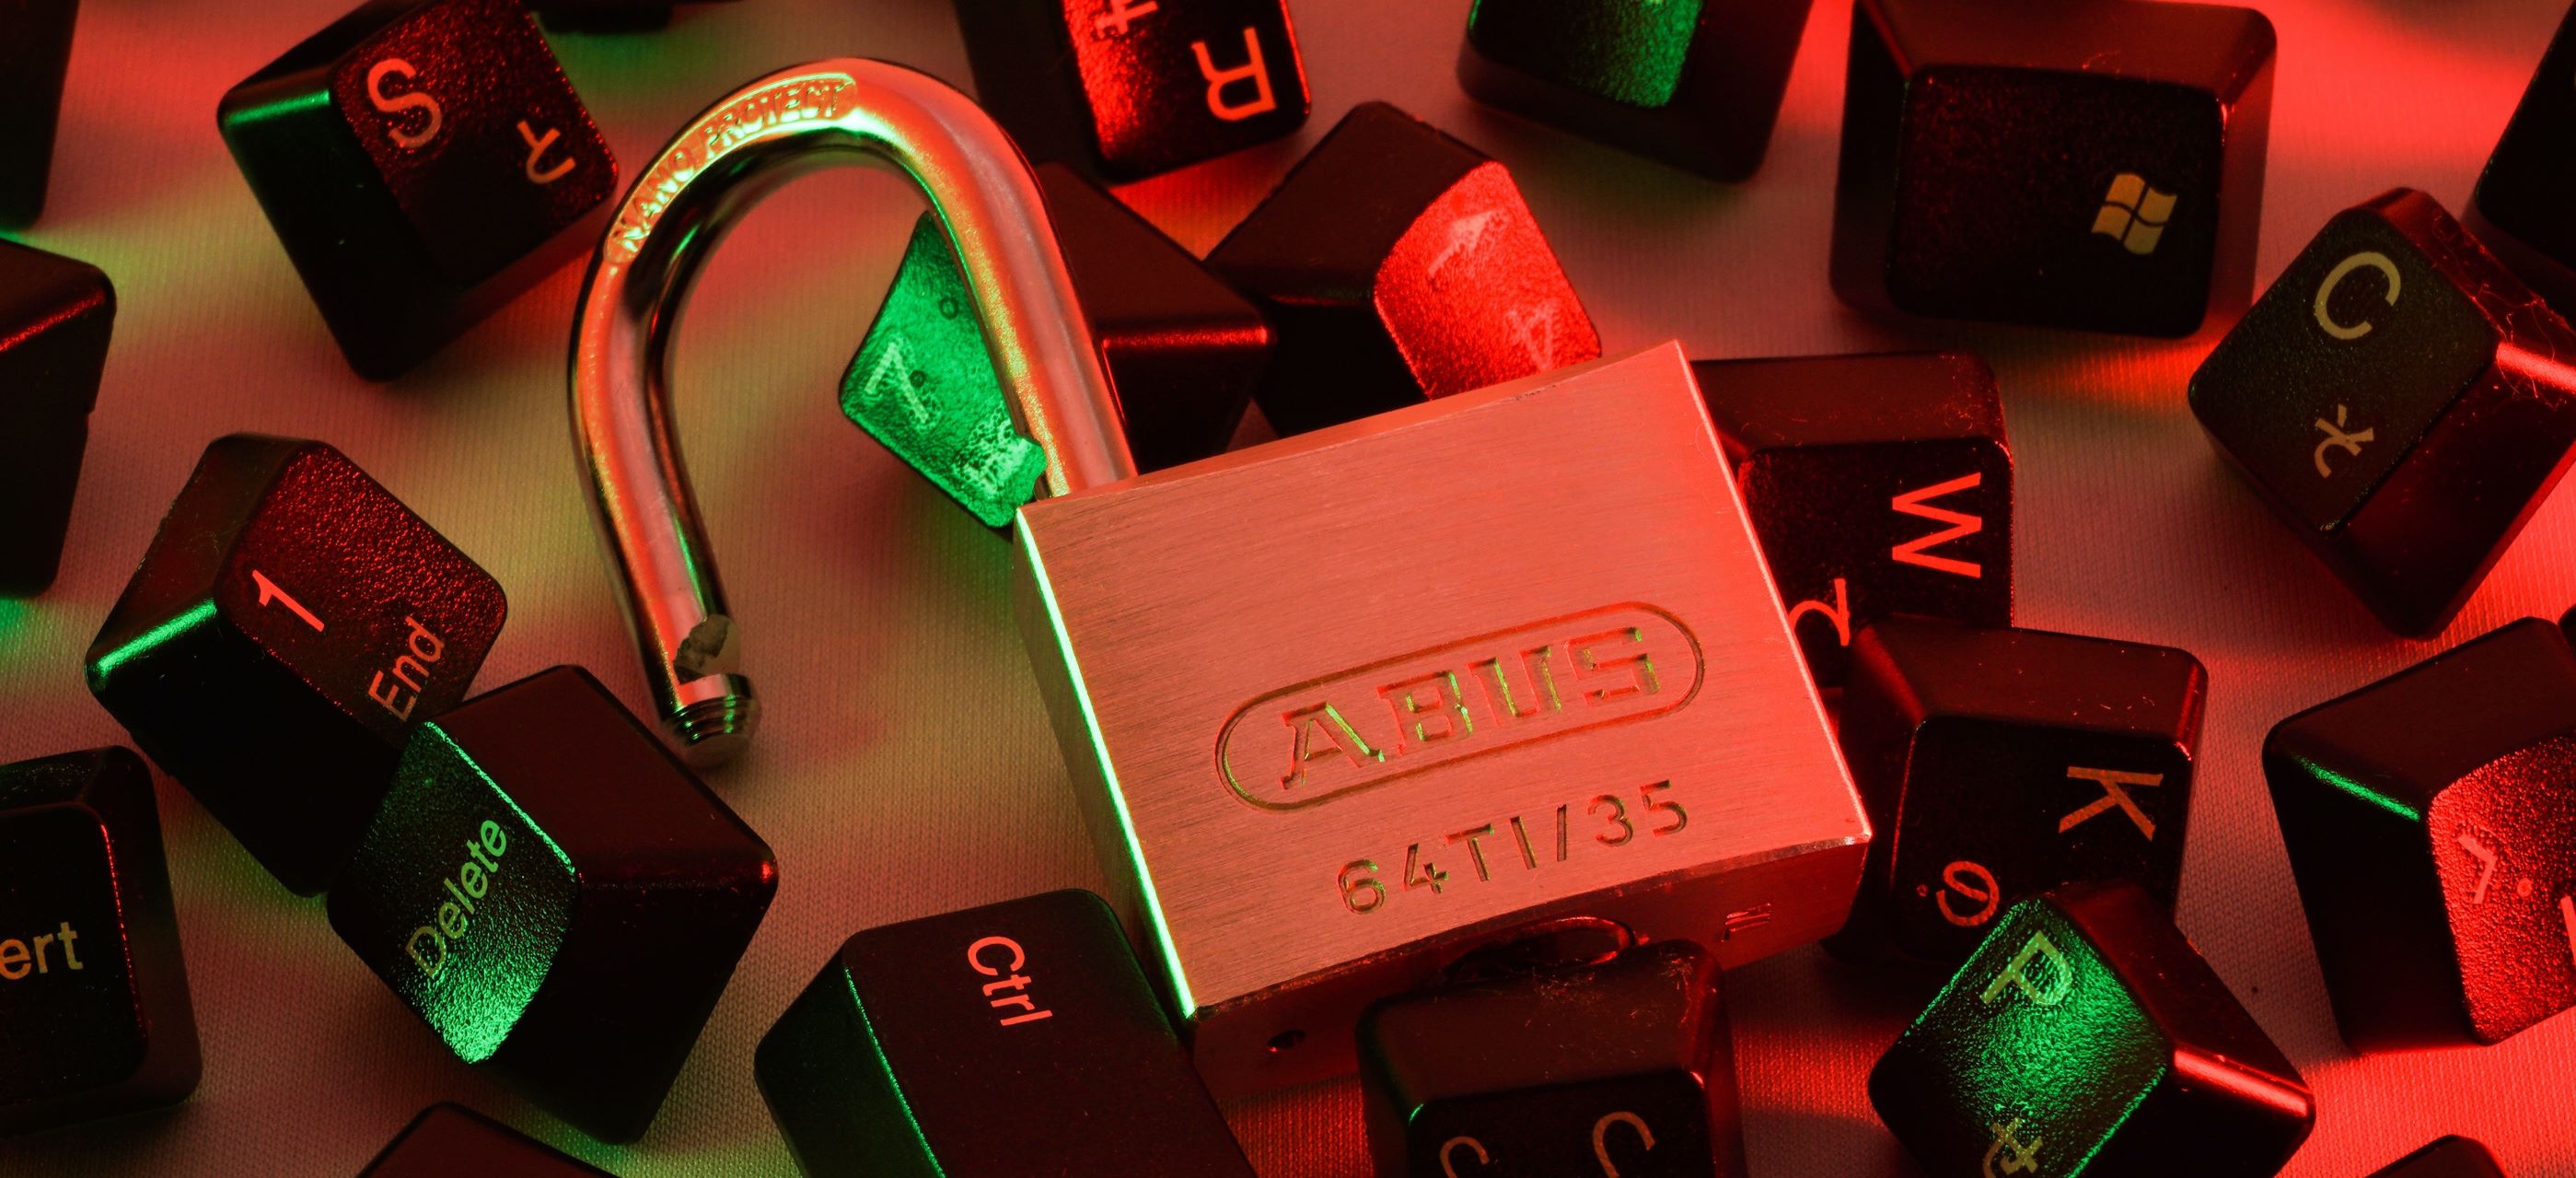 An image of some scattered keyboard keys and a padlock to suggest computer security